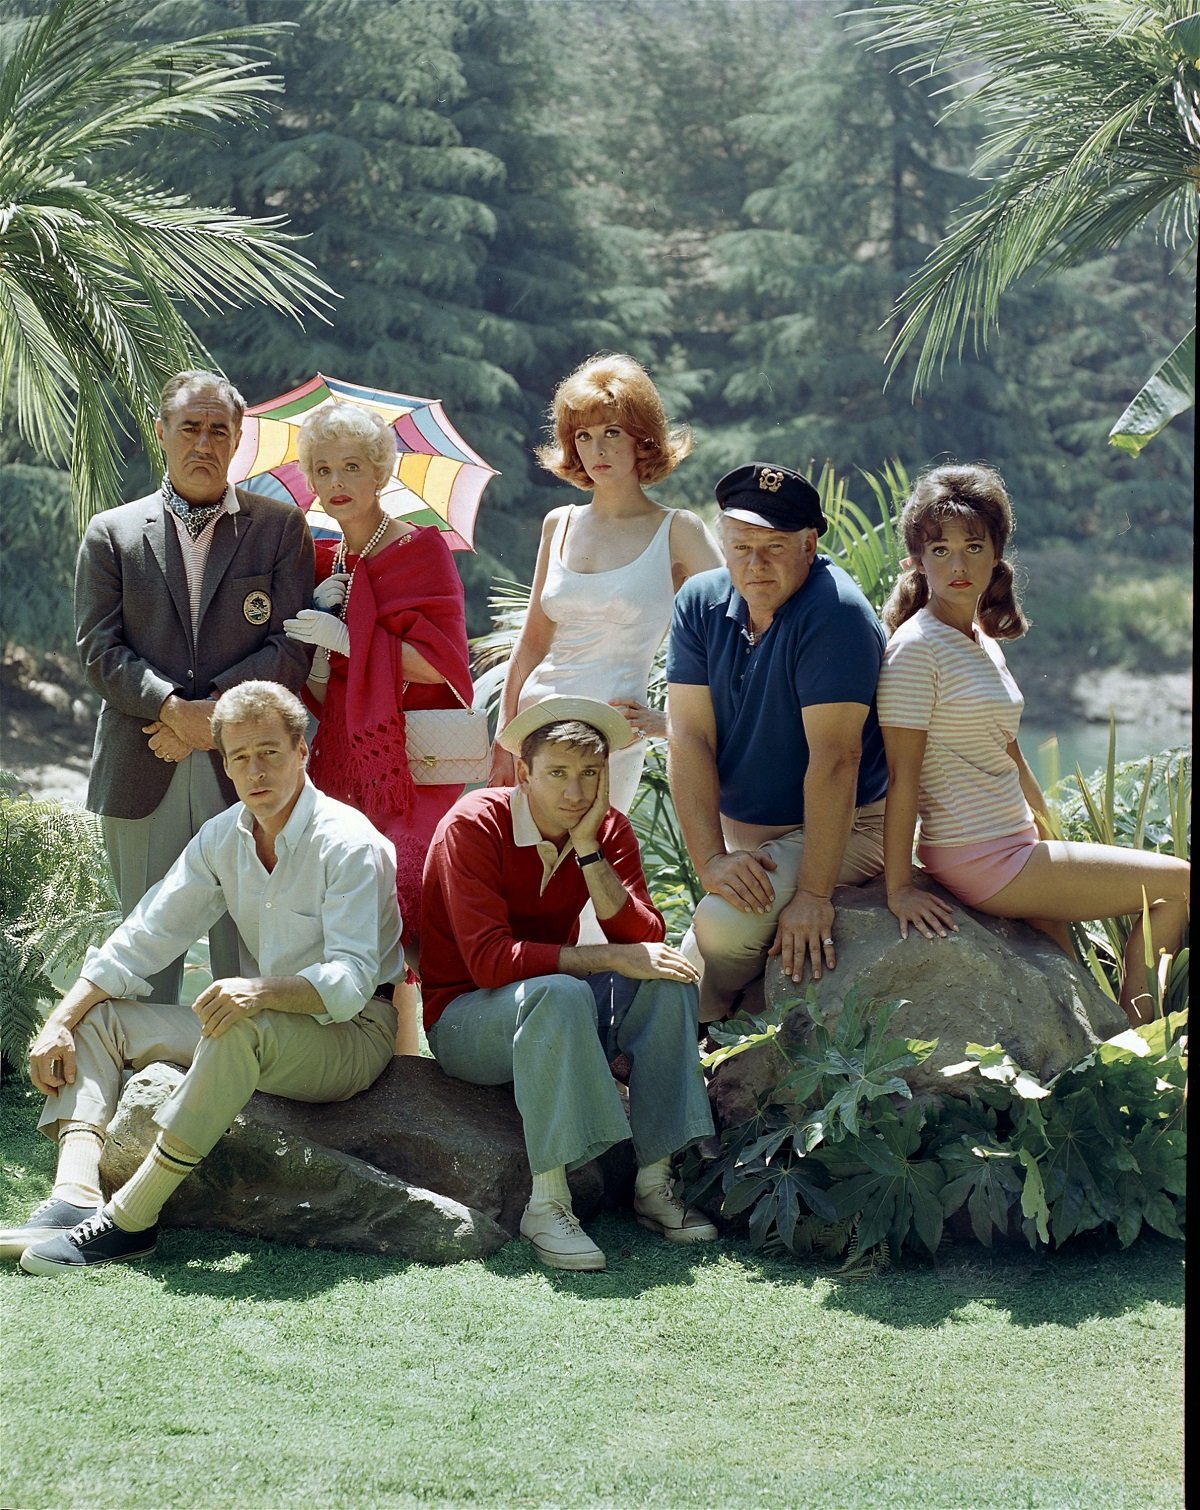 The 'Gilligan's Island' cast dressed as their characters and posing on an island set for a promotional photo.